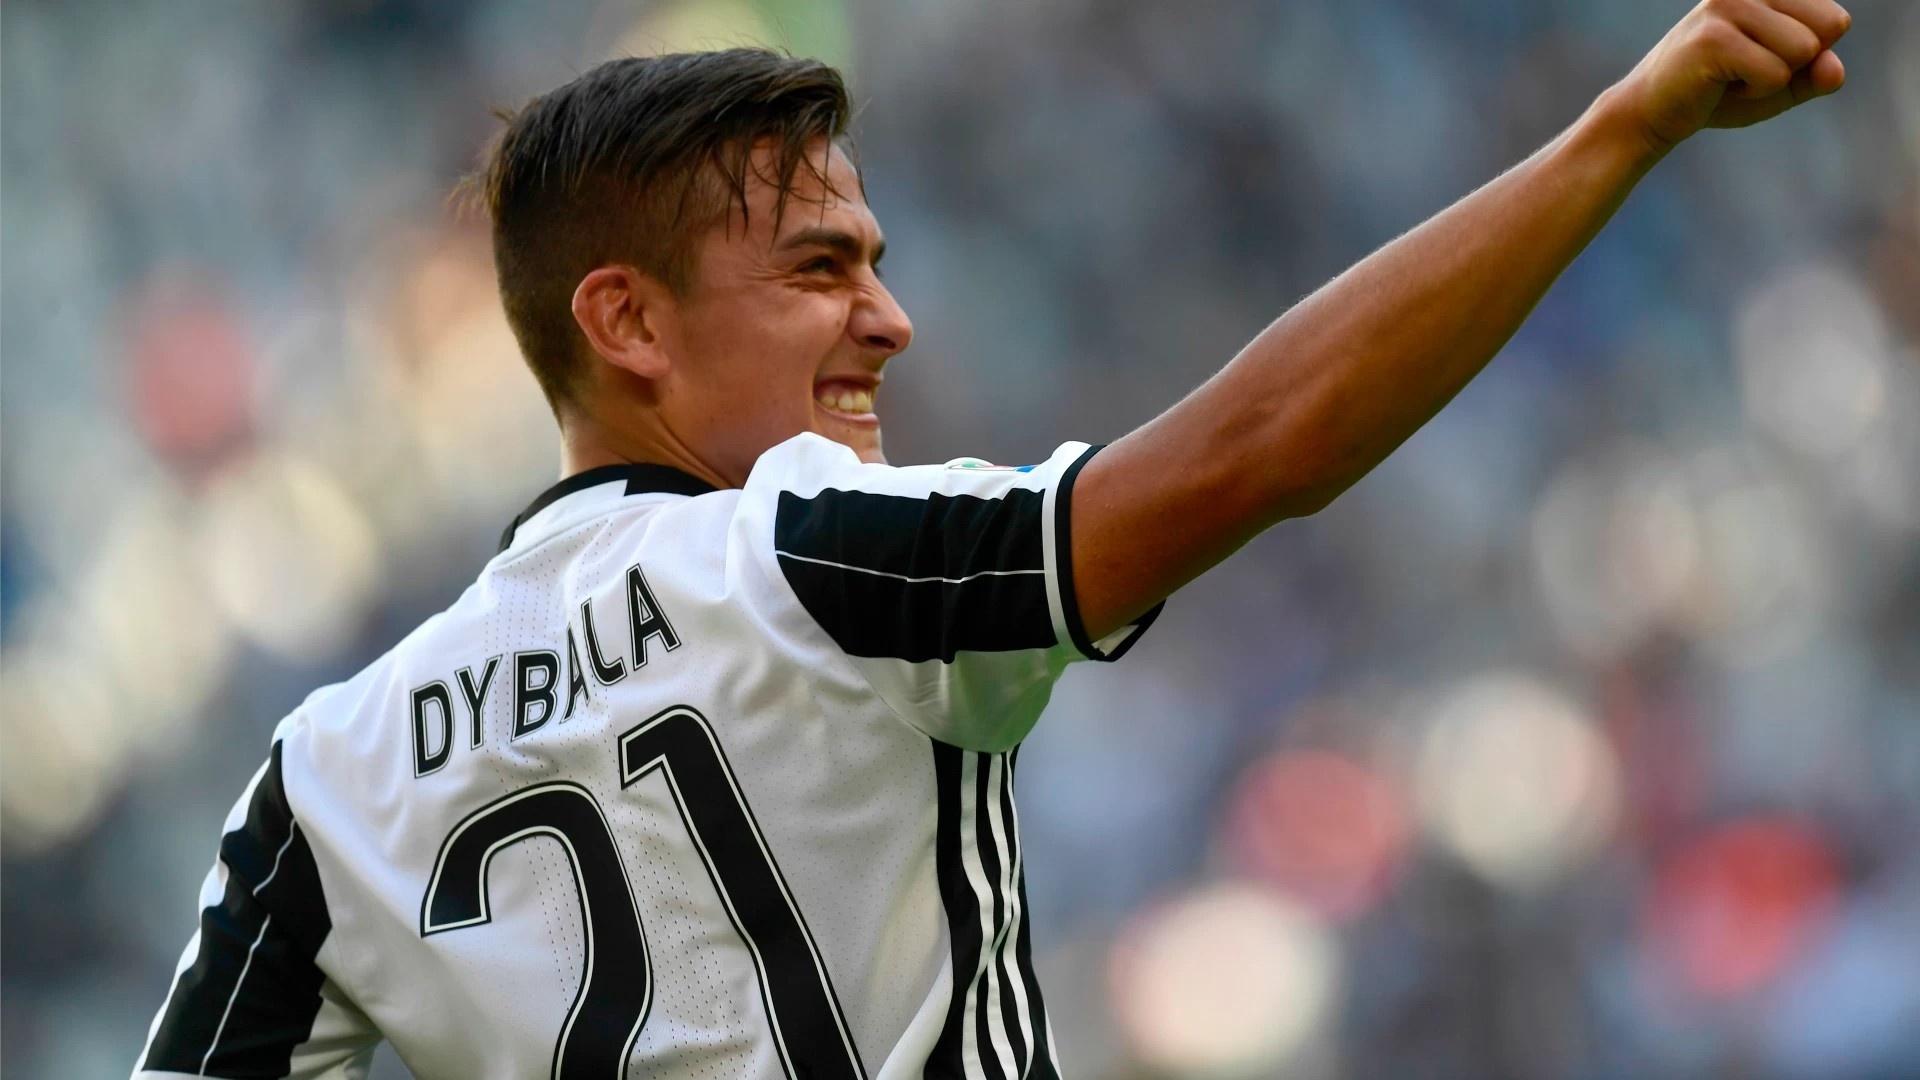 Dybala: One of the best footballers Argentina has ever produced. 1920x1080 Full HD Background.